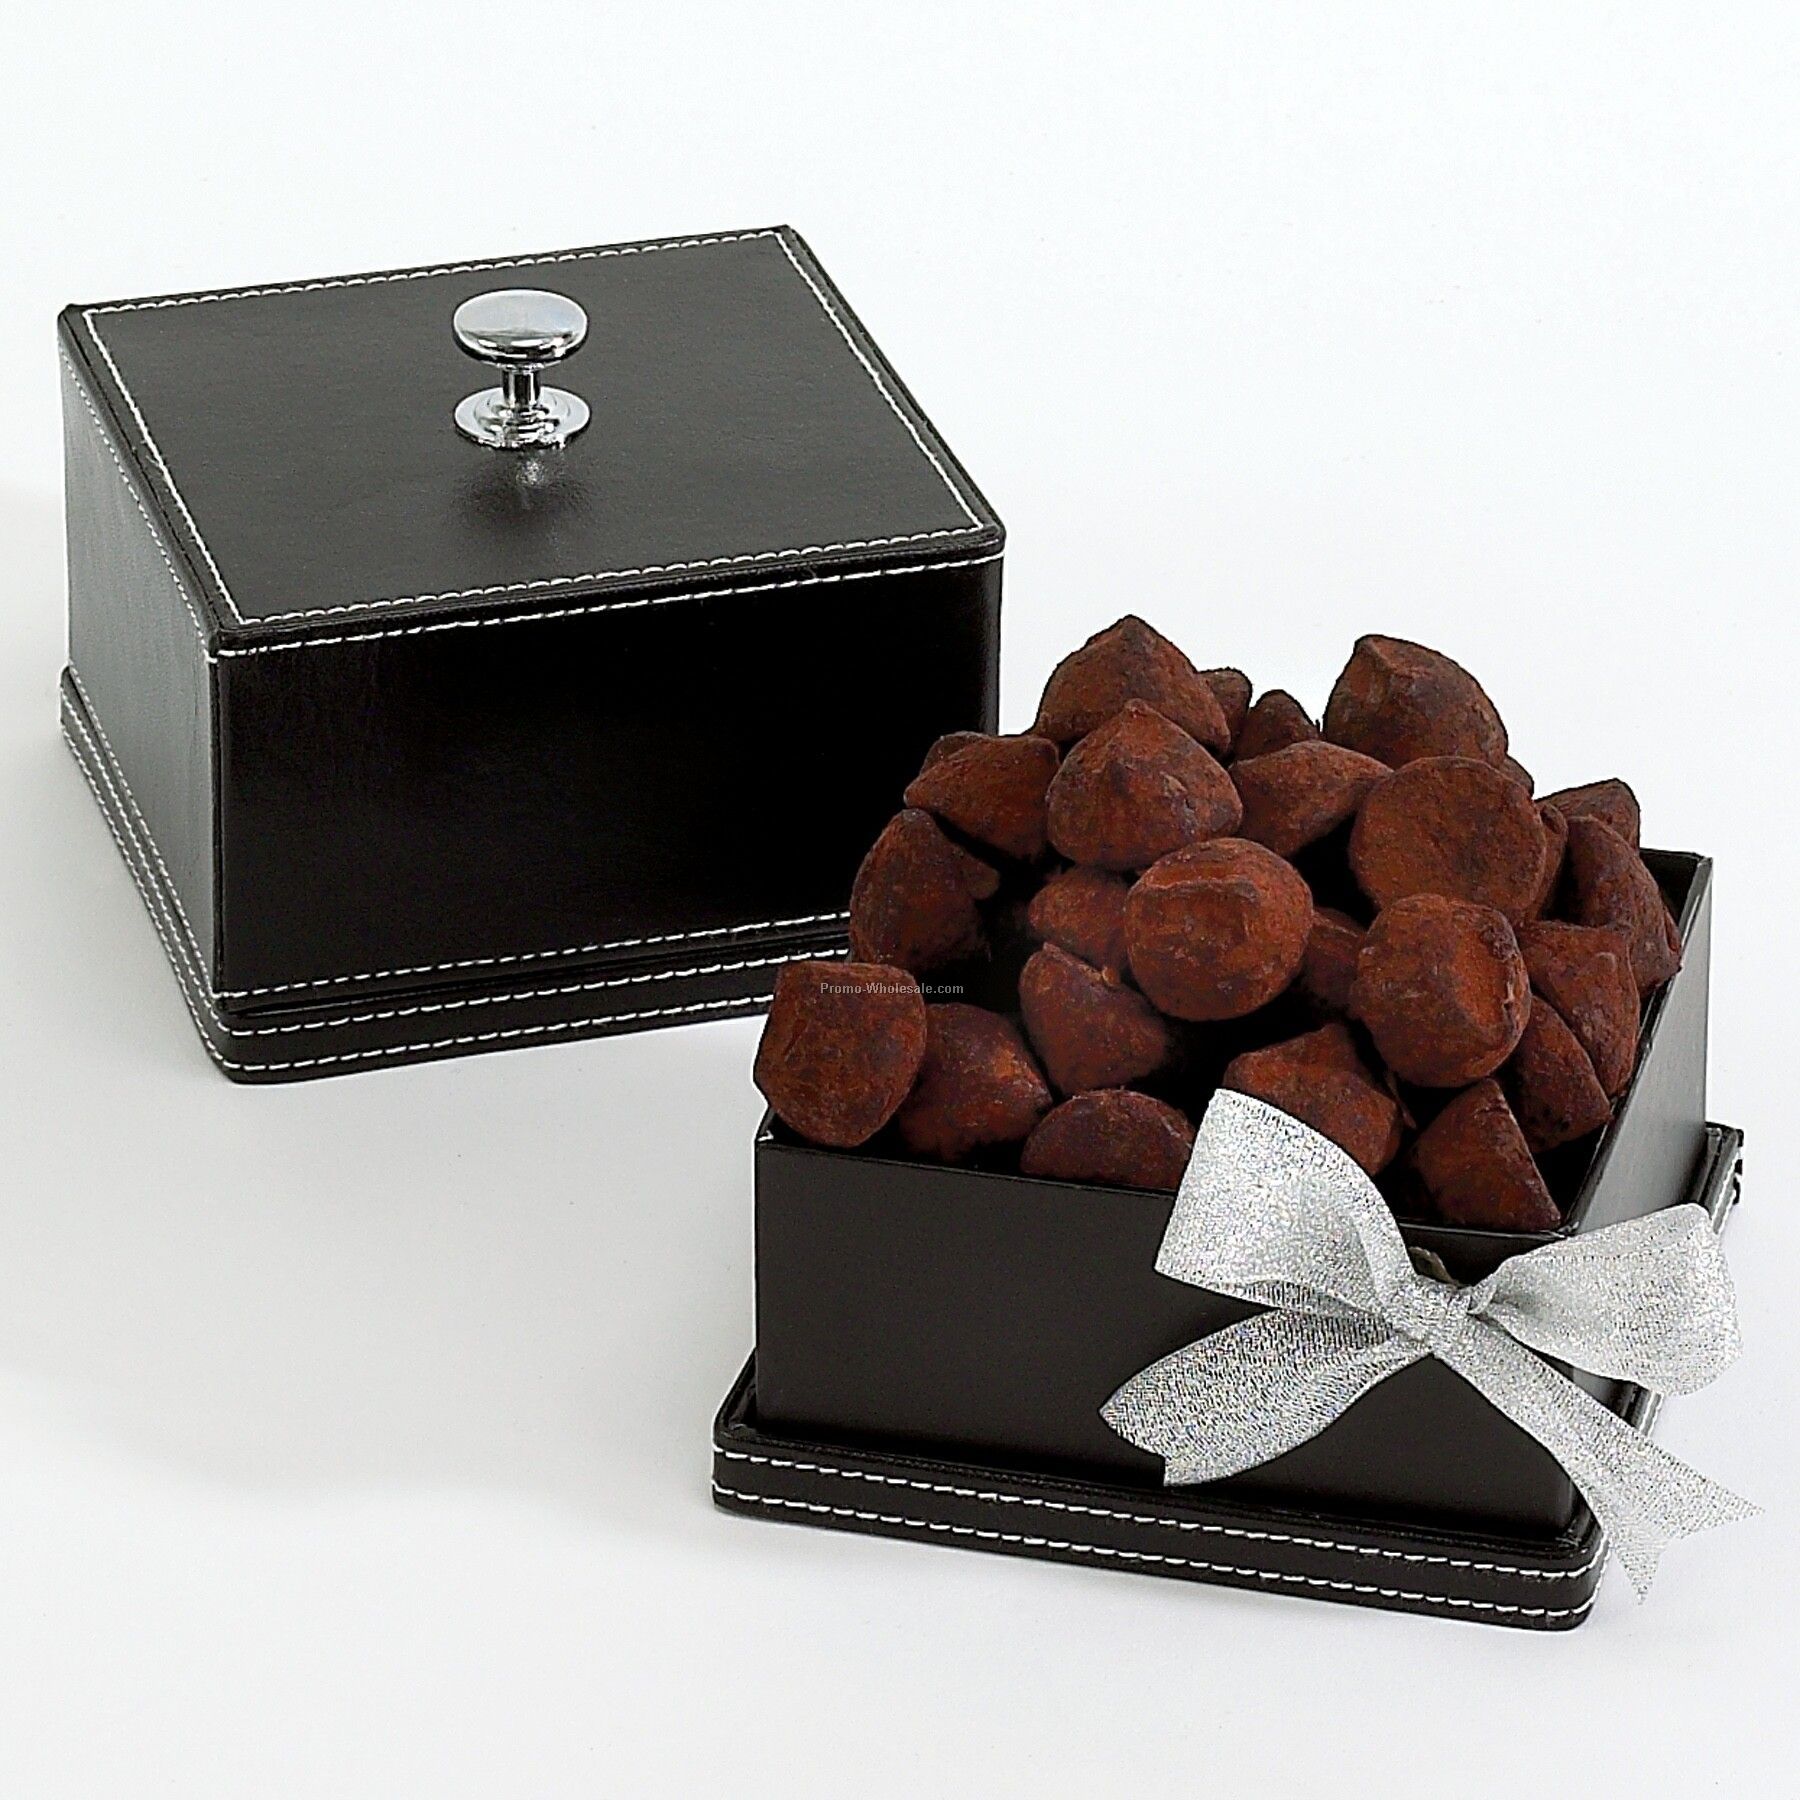 Executive Sweets With French Chocolate Truffles